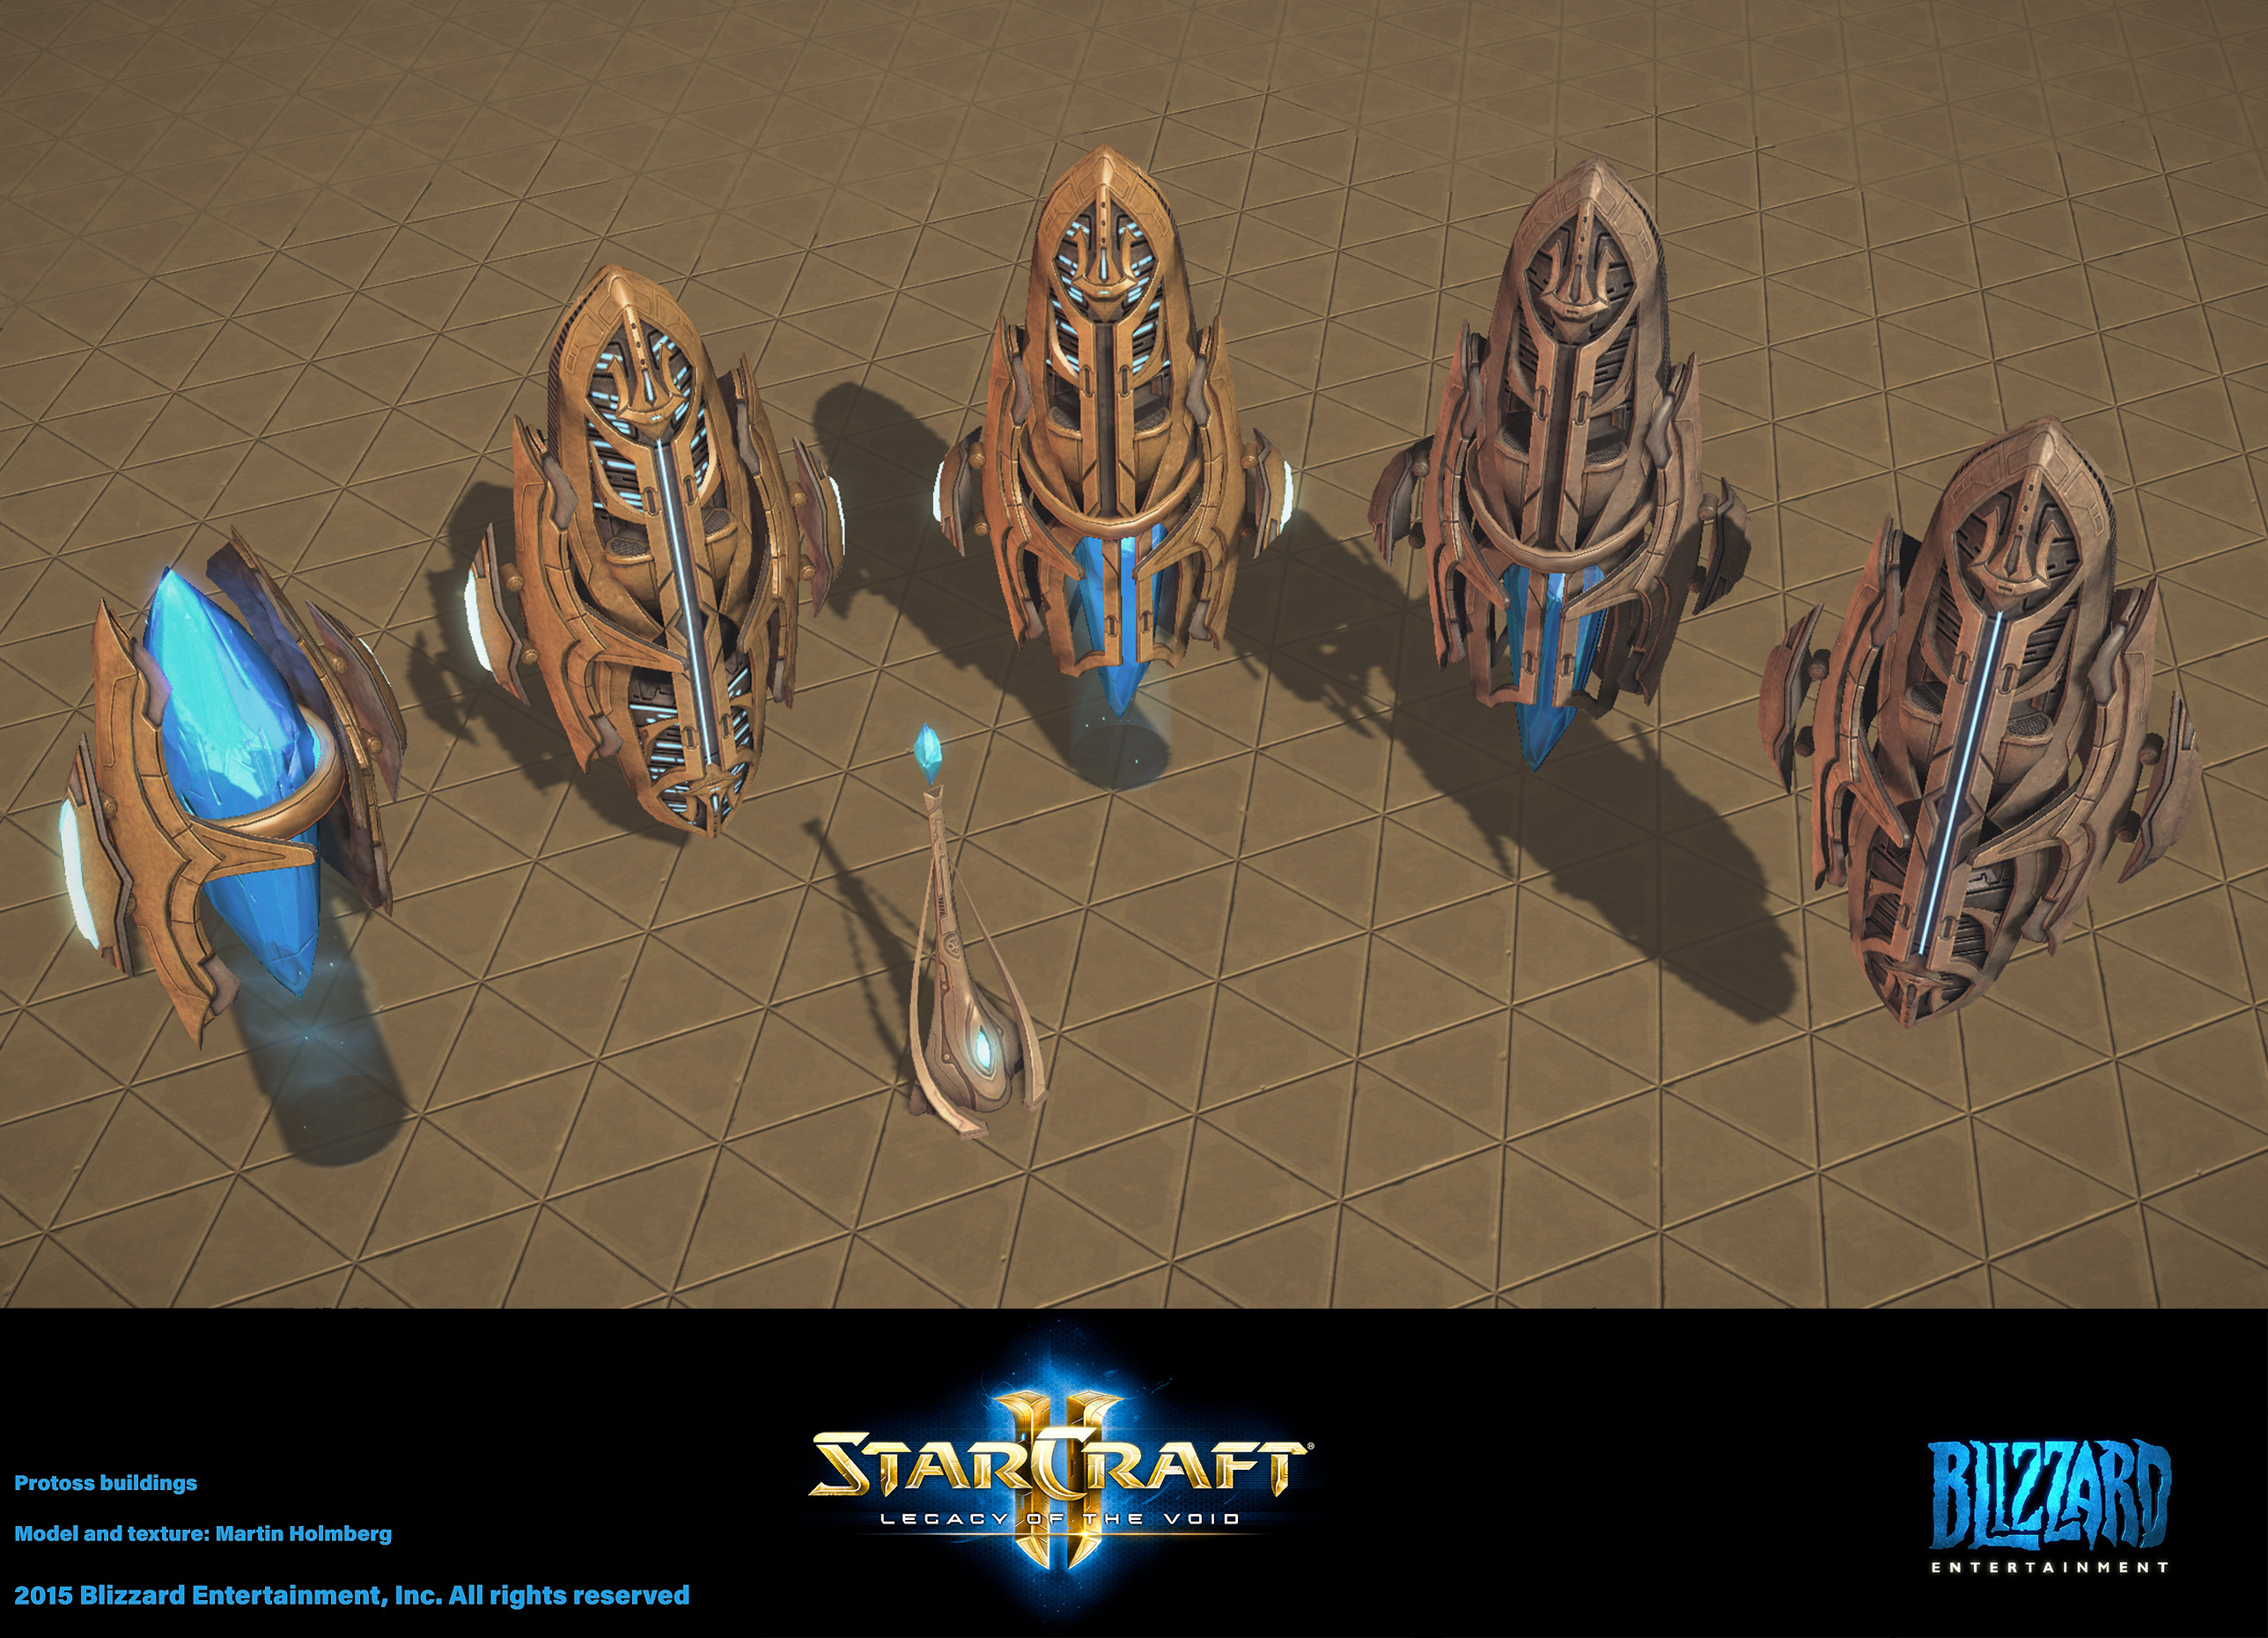 more protoss buildings. These ones were later reskinned to fit with other protoss factions like cybros